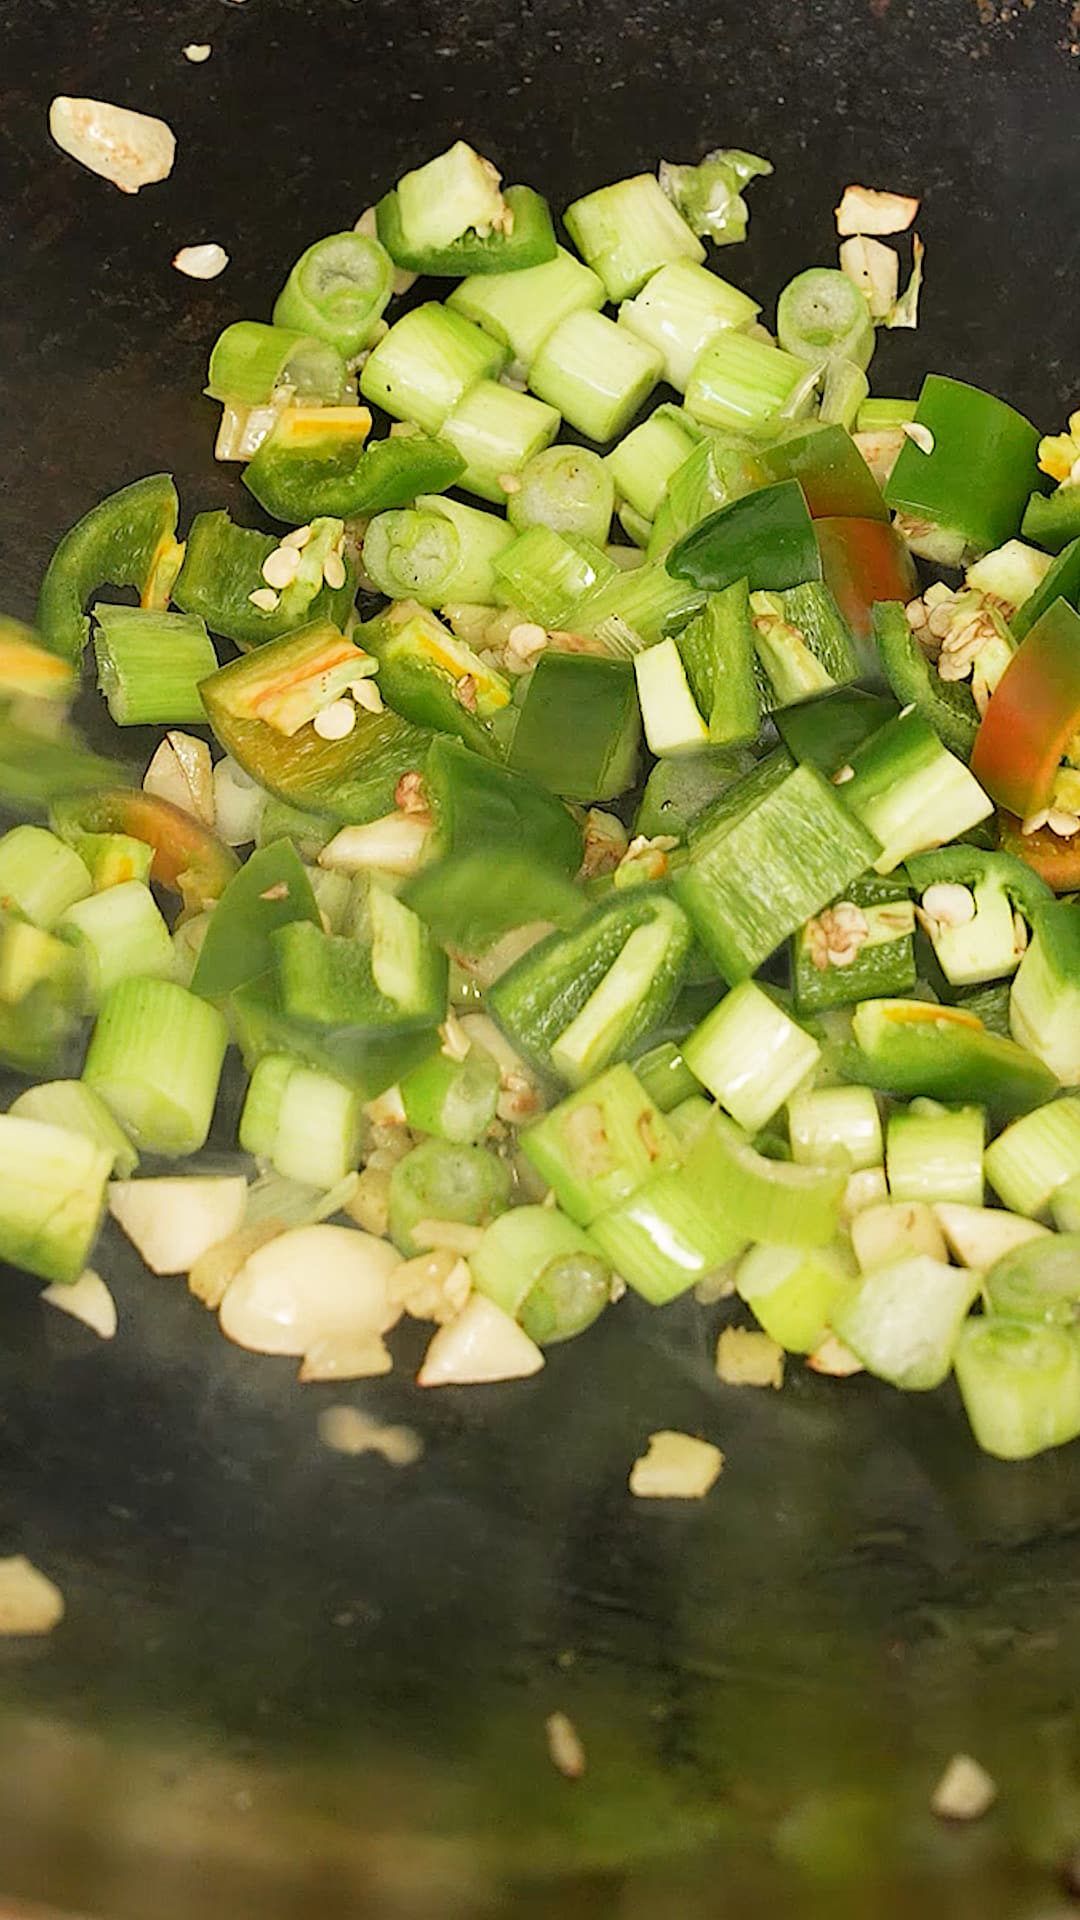 Chopped garlic, peppers, and scallions being stir fried in a wok.